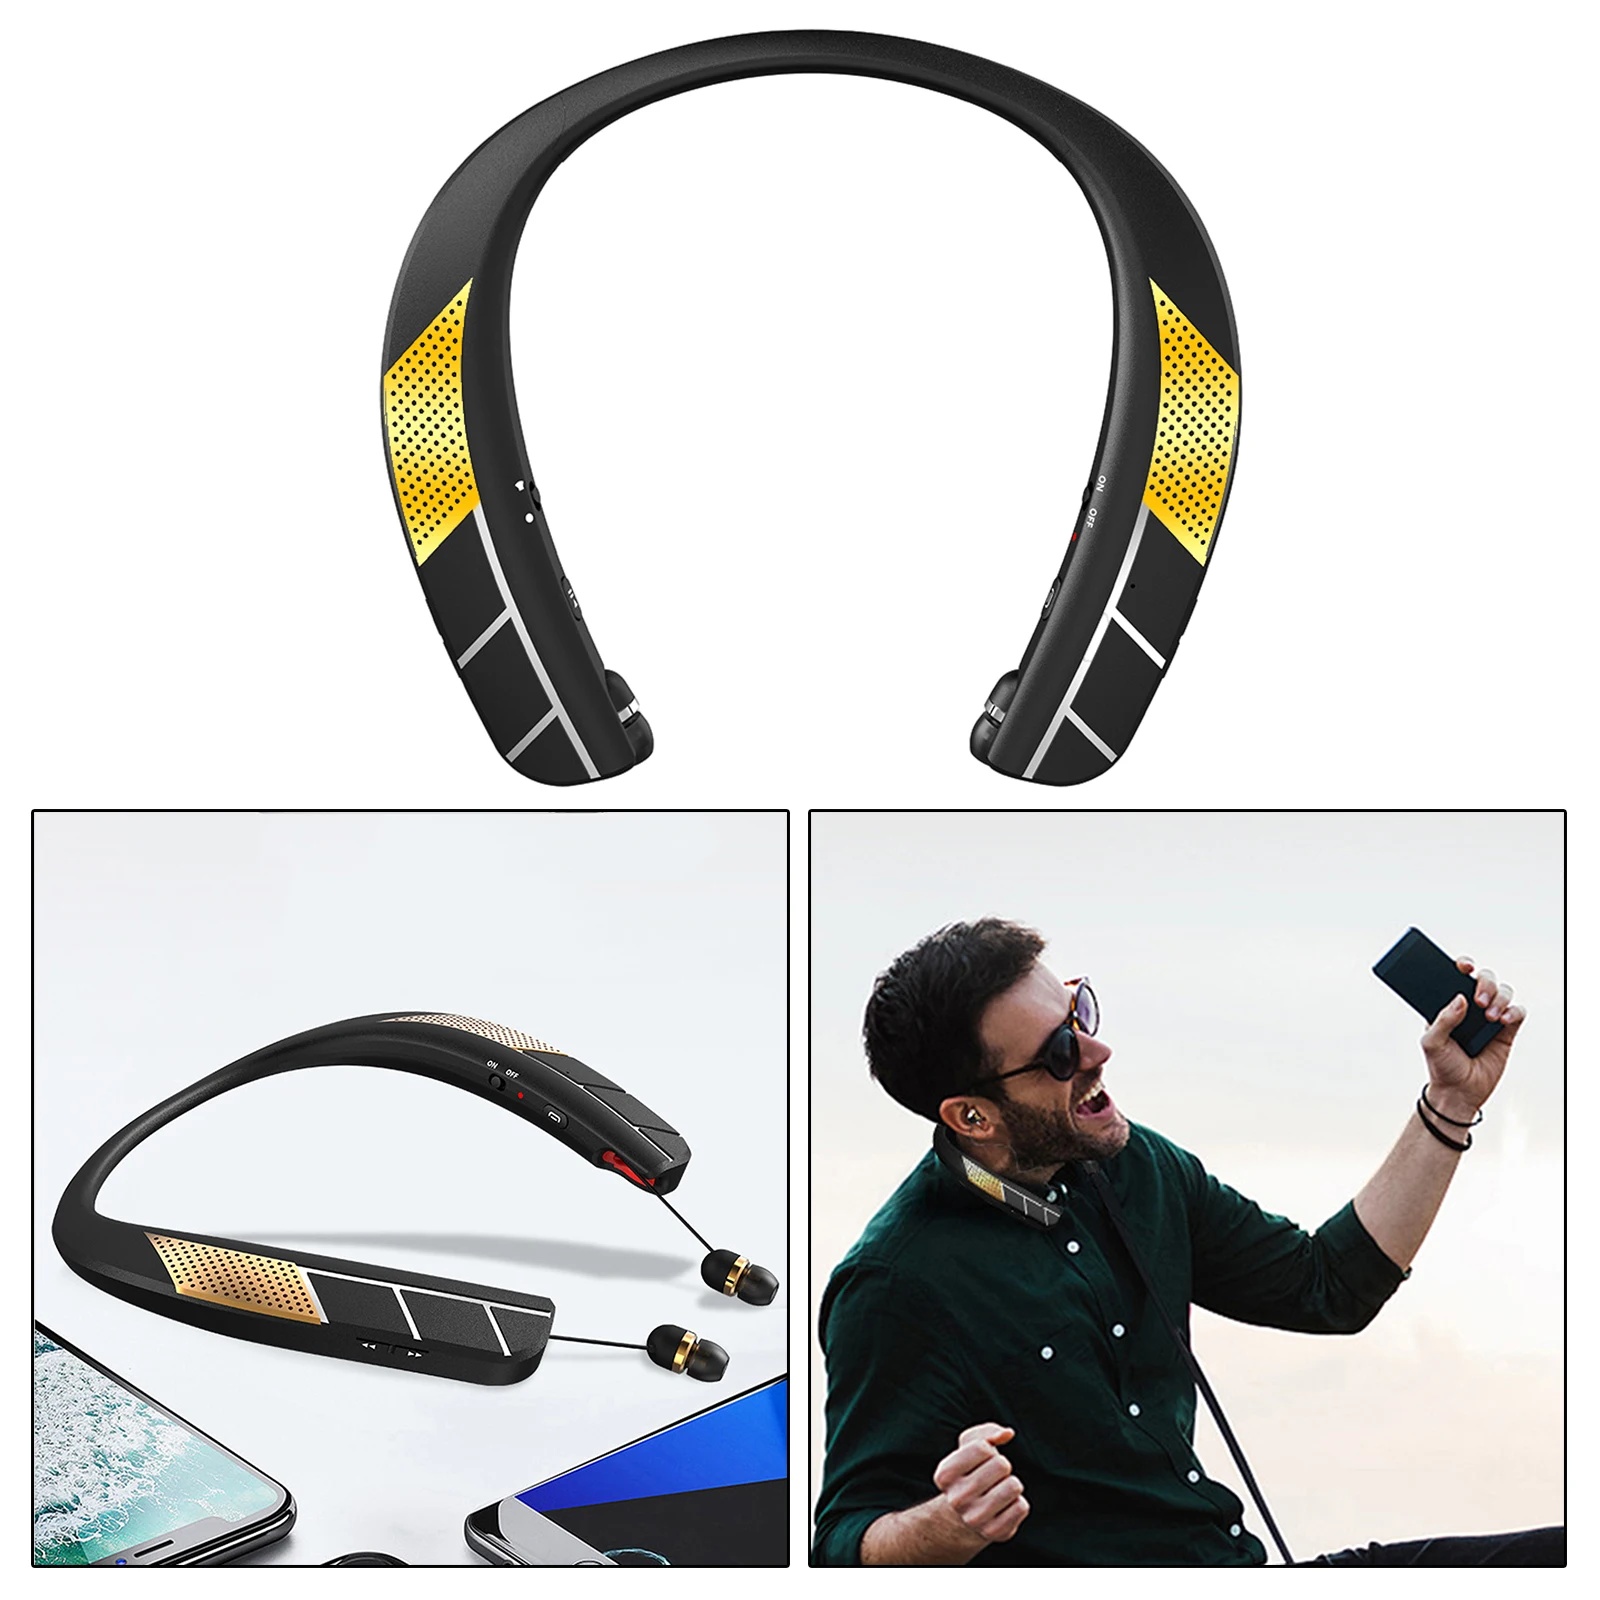 2 in 1 3D Surround Stereo Neckband Wireless Speaker Bluetooth w/ Retractable Earbuds Headphones Audio Portable Listen to Music